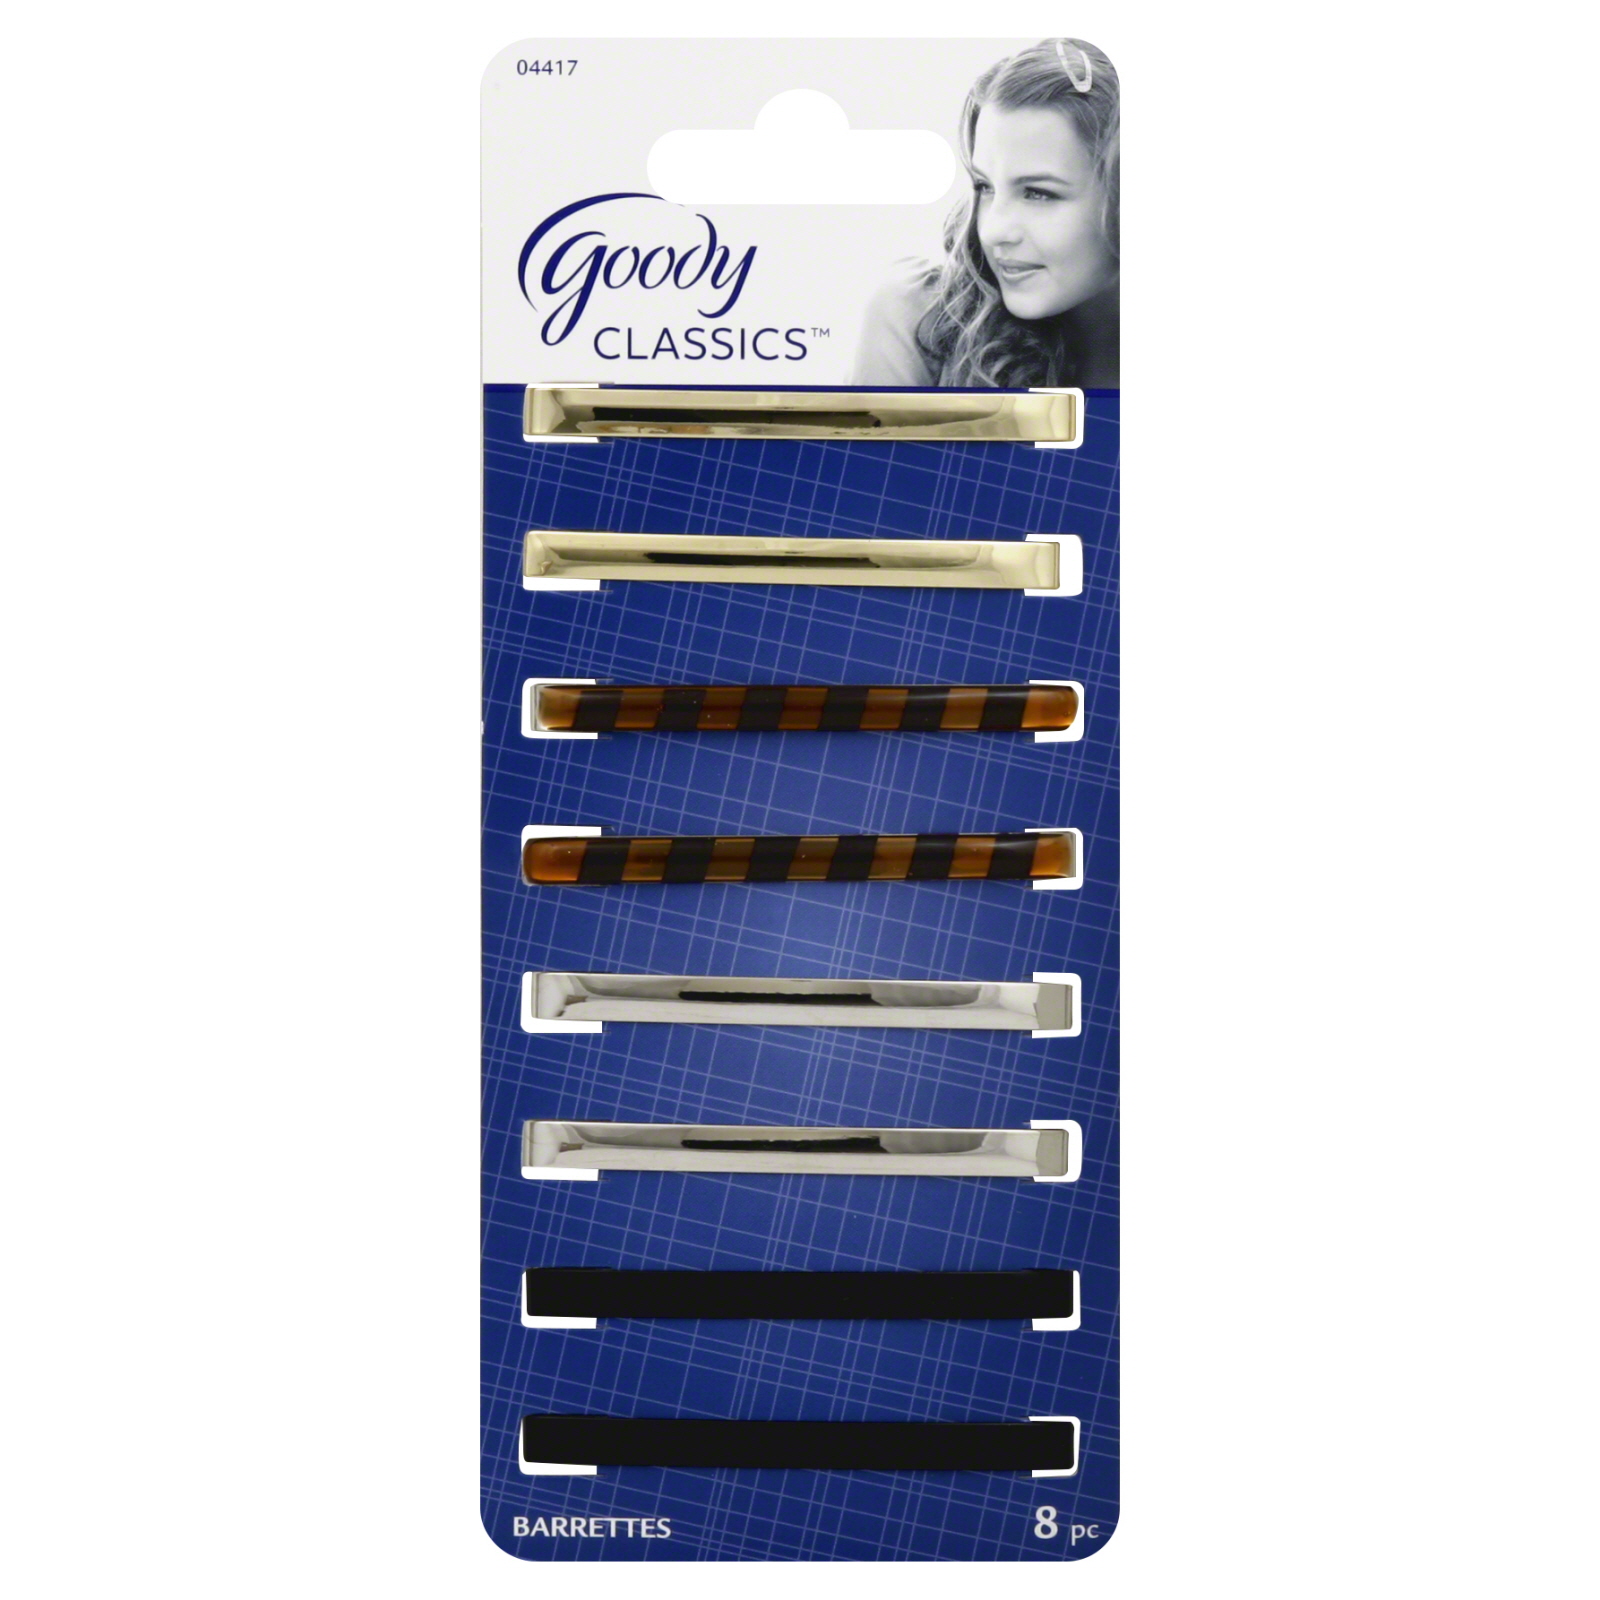 UPC 041457044179 product image for Goody Classics Patterned Staytight Barrettes, 8 CT | upcitemdb.com